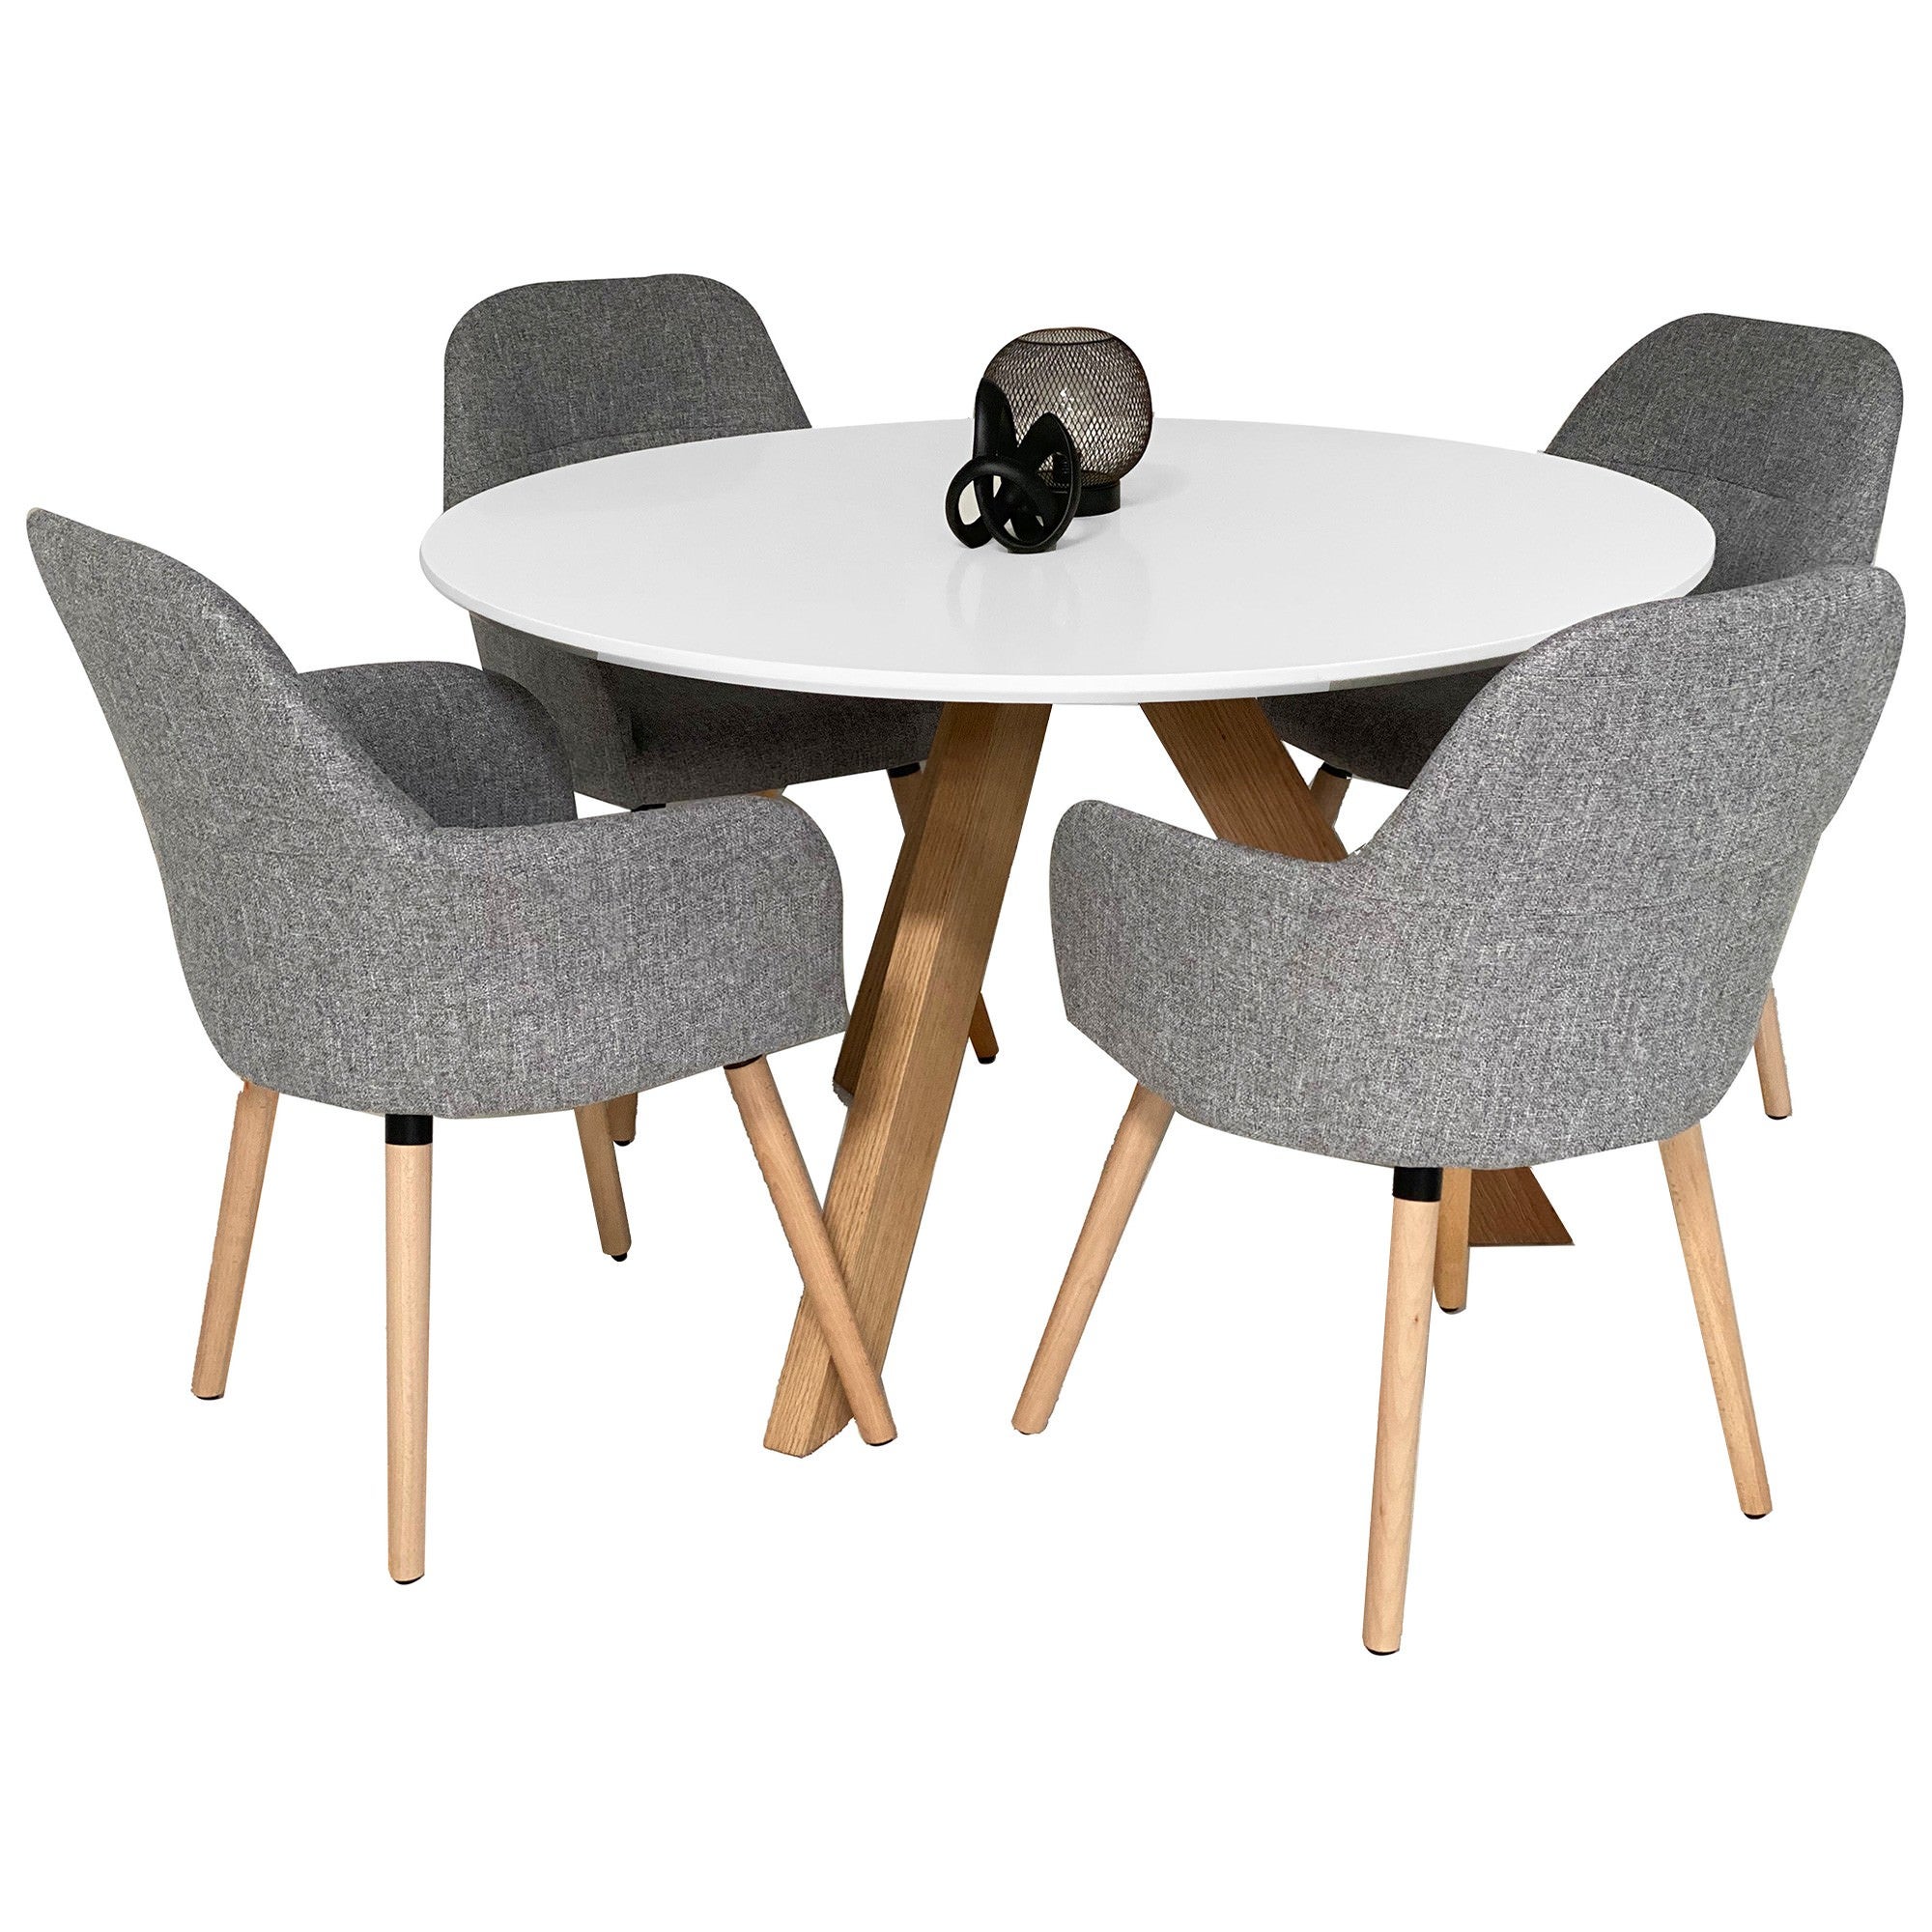 Morrison 5 Piece Round Dining Table Set, 120cm, with Grey Milan Chair